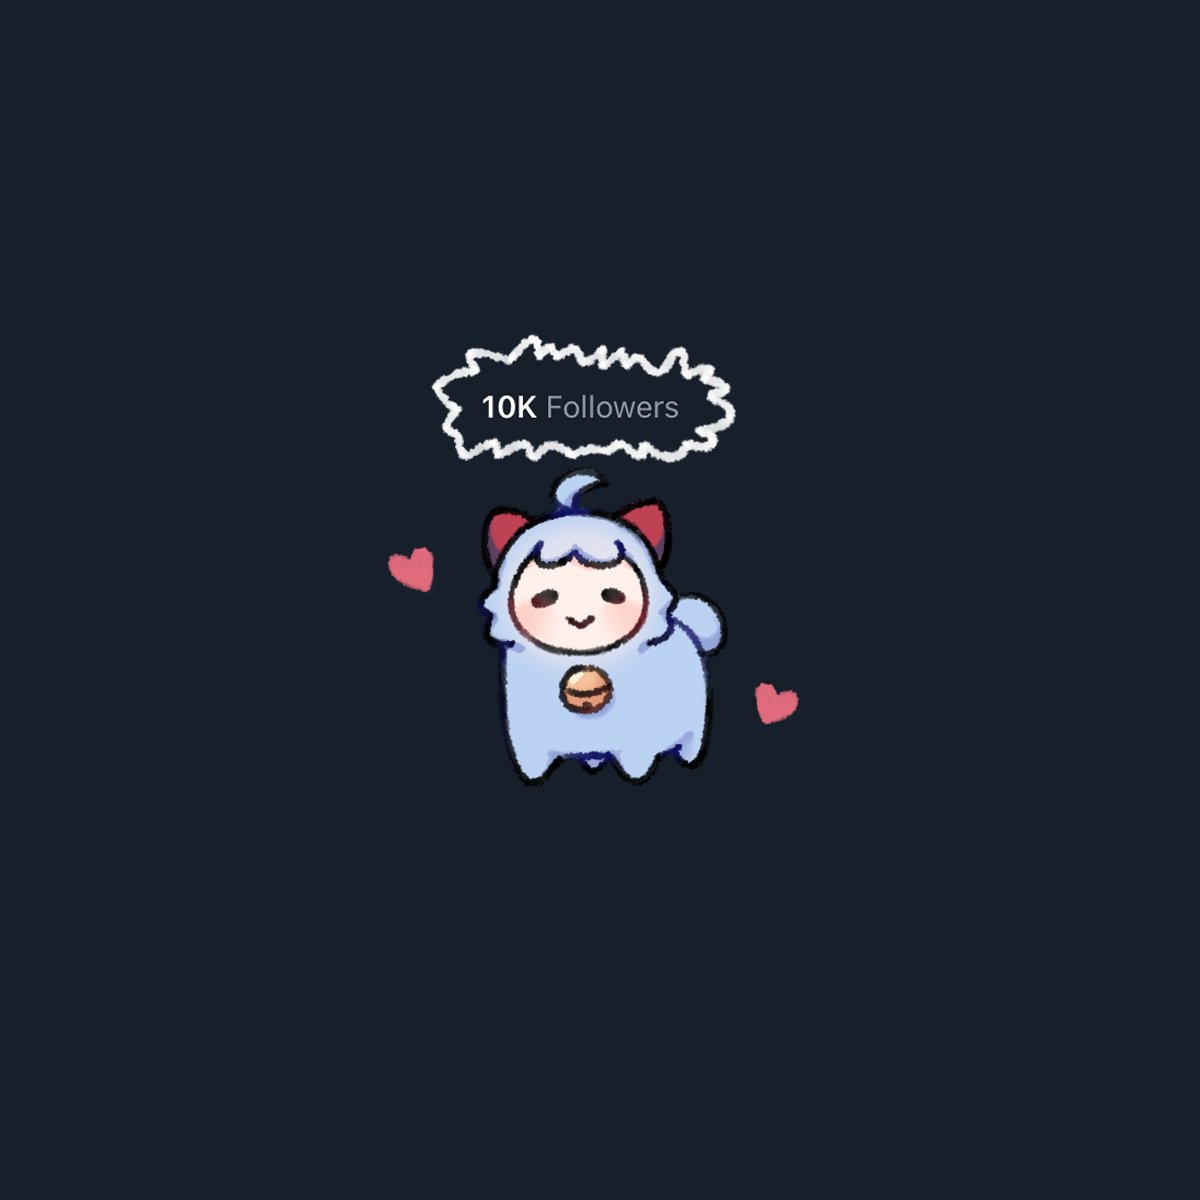 132
thank you for 10k followers! i'm so grateful to all of you for supporting this silly little doodle account that i made one night on a whim🐑💙

as celebration, reply with YOUR OWN cocogoat fanart and i will make a collage that will be my banner for a month! (open until 5/8)